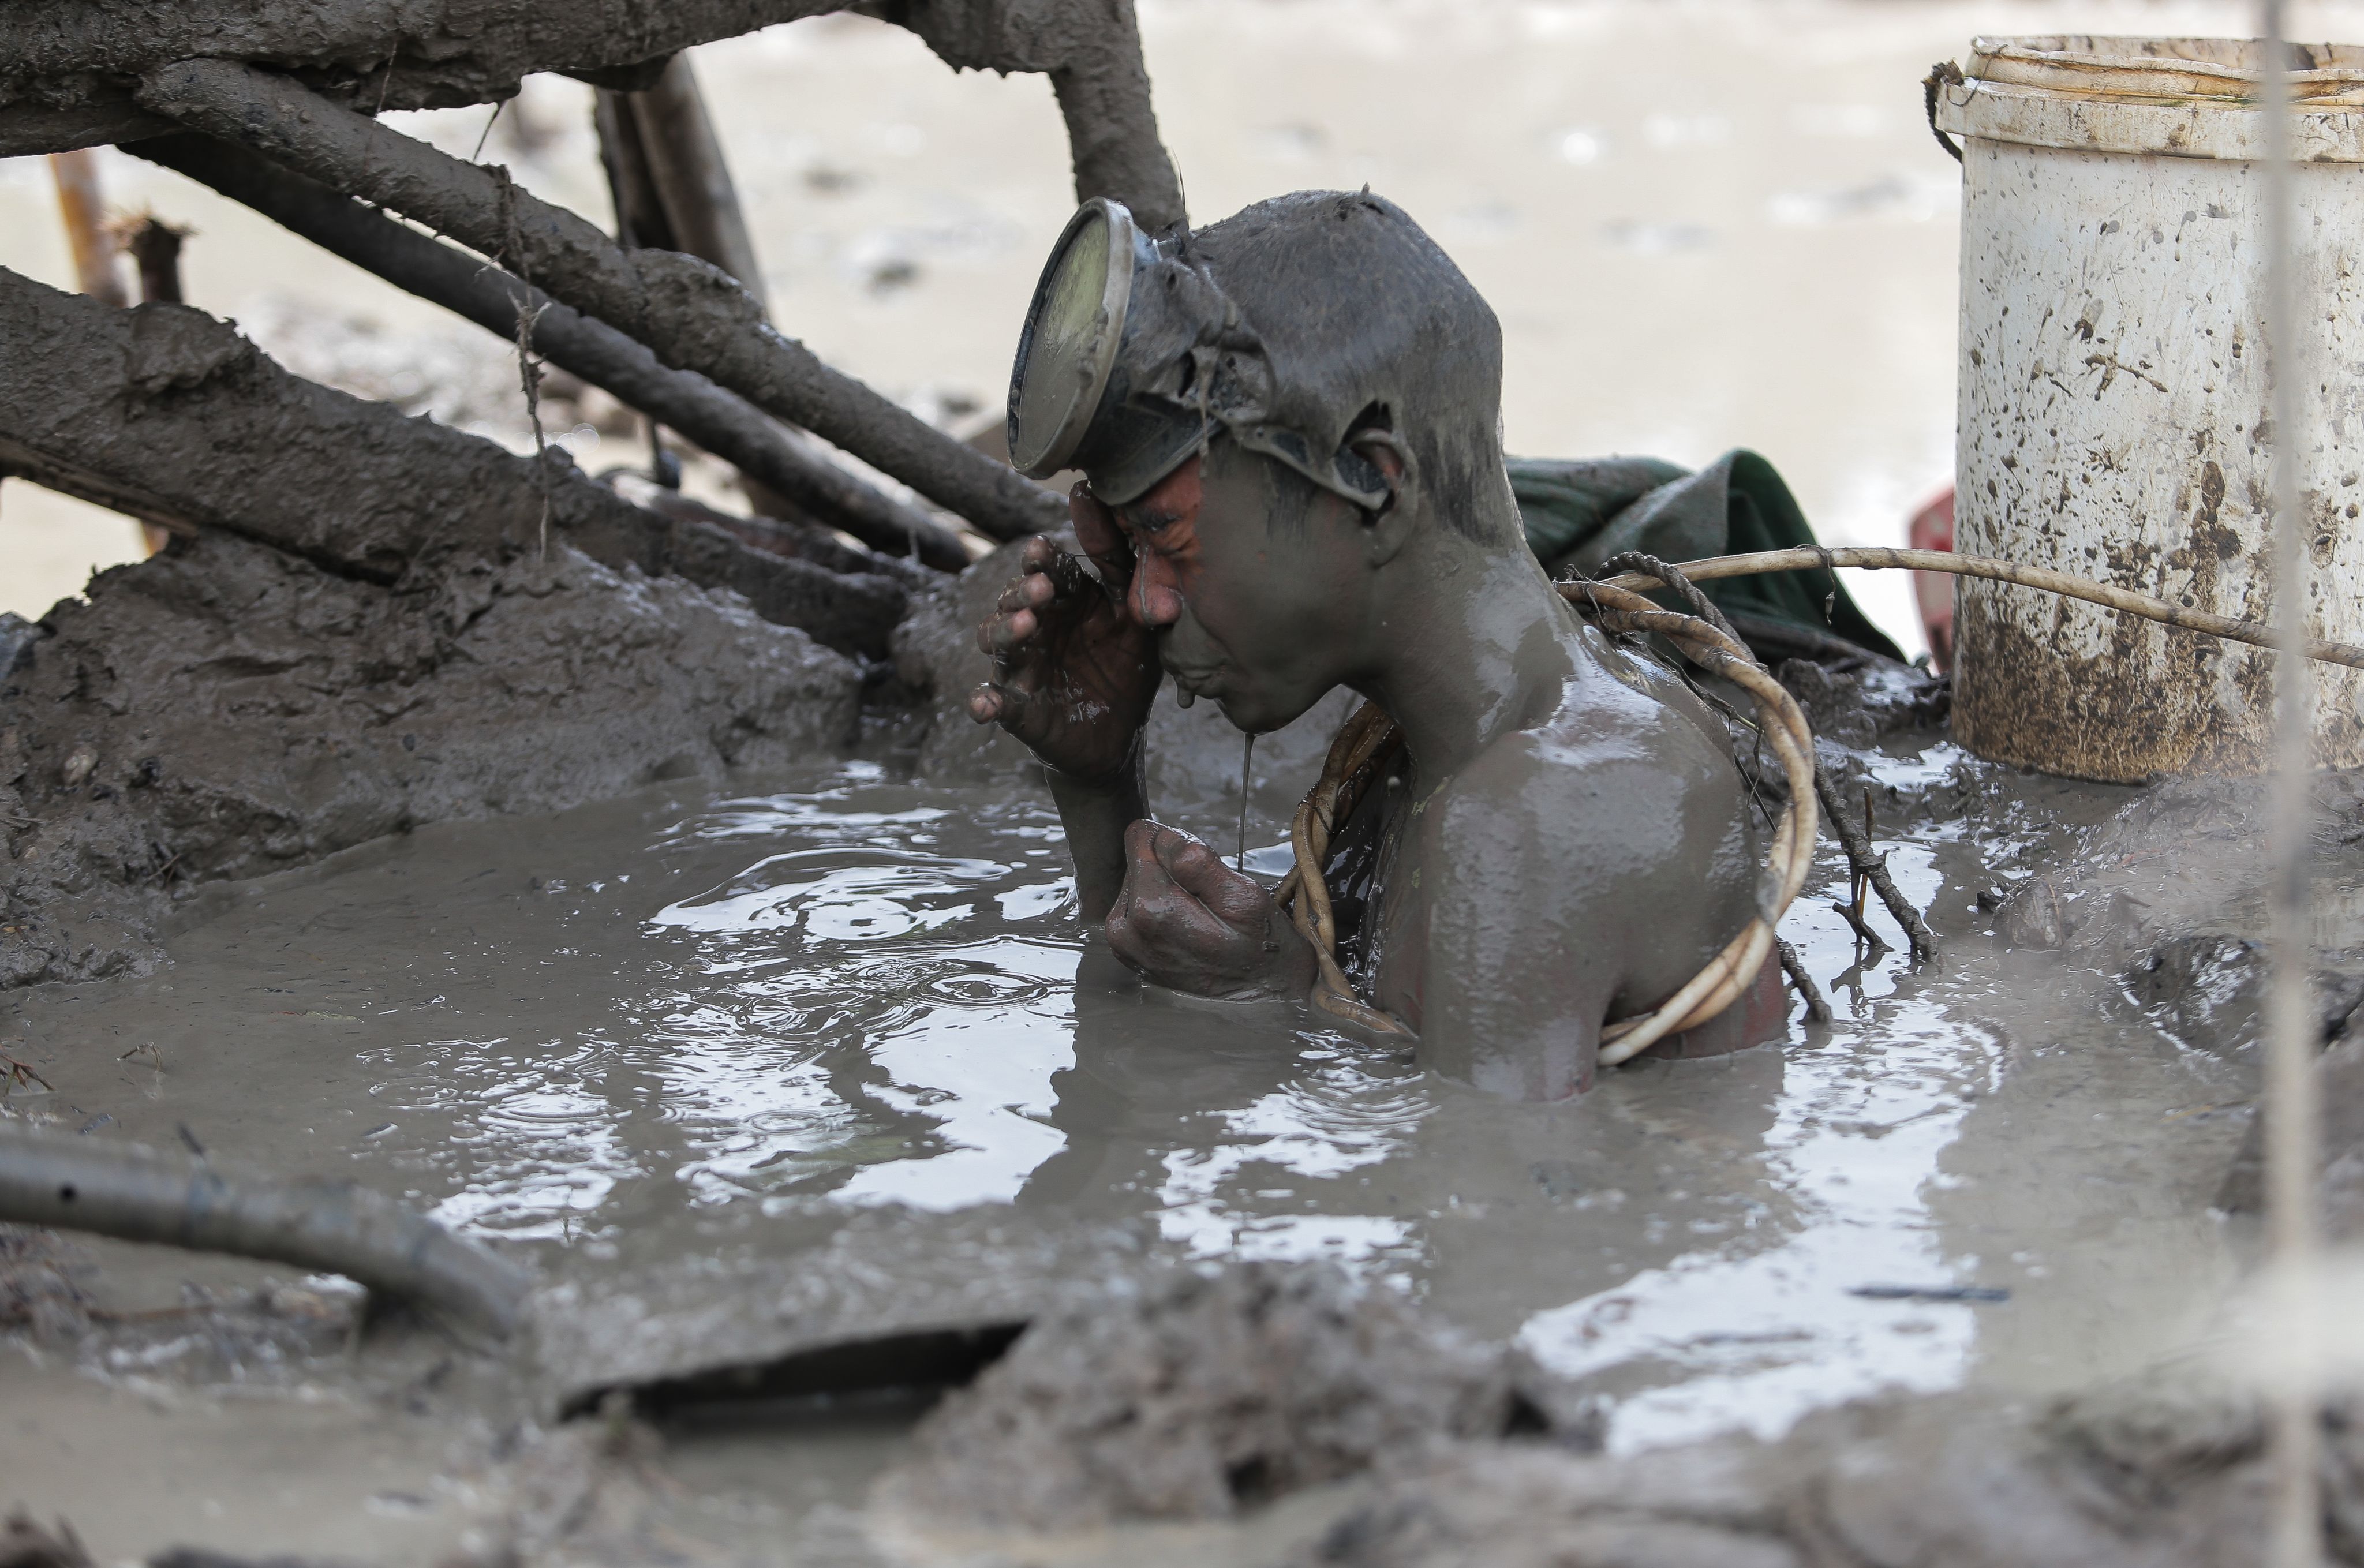 A boy wipes mud from his eyes after compressor diving for an hour straight under 40 feet of mudwater